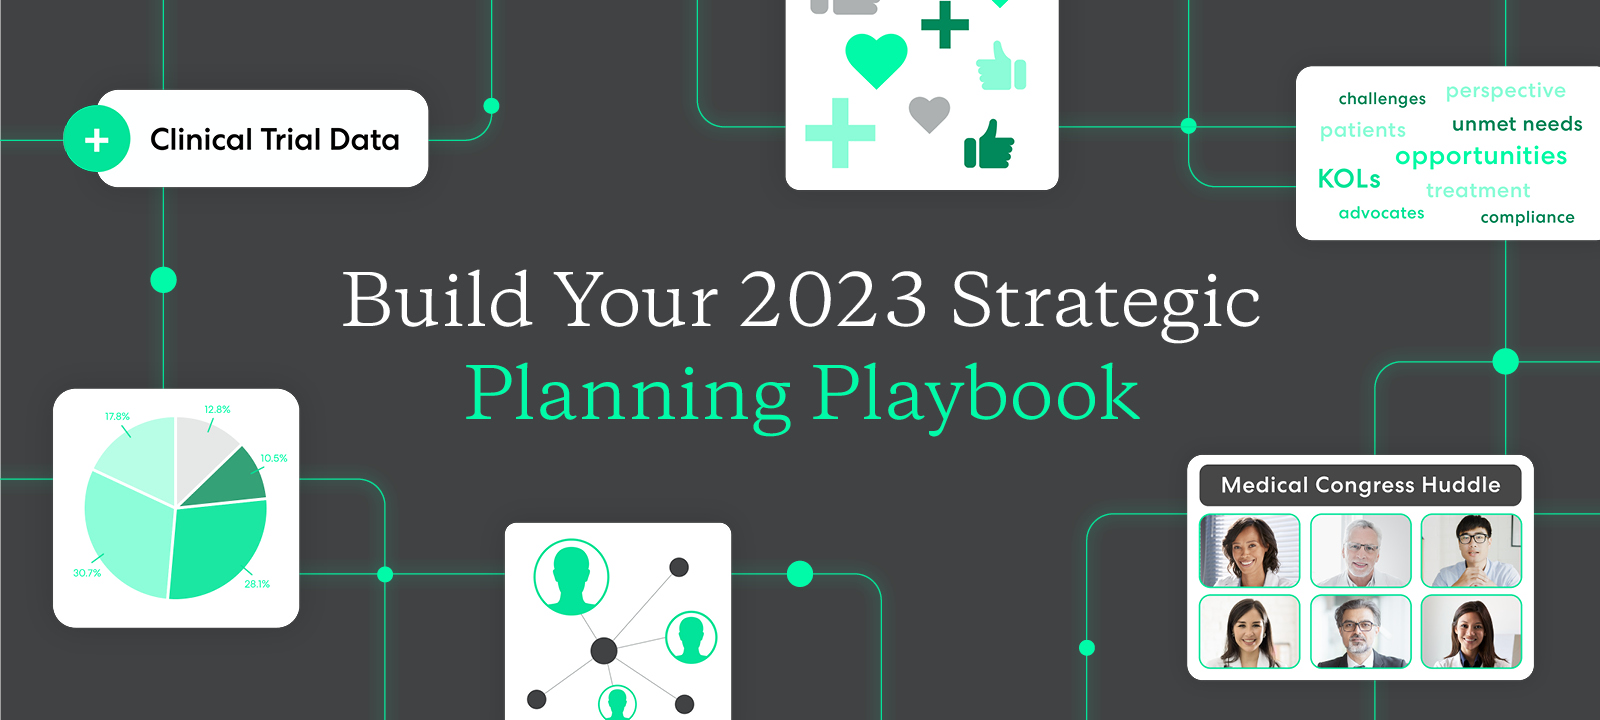 Build Your 2023 Strategic Planning Playbook